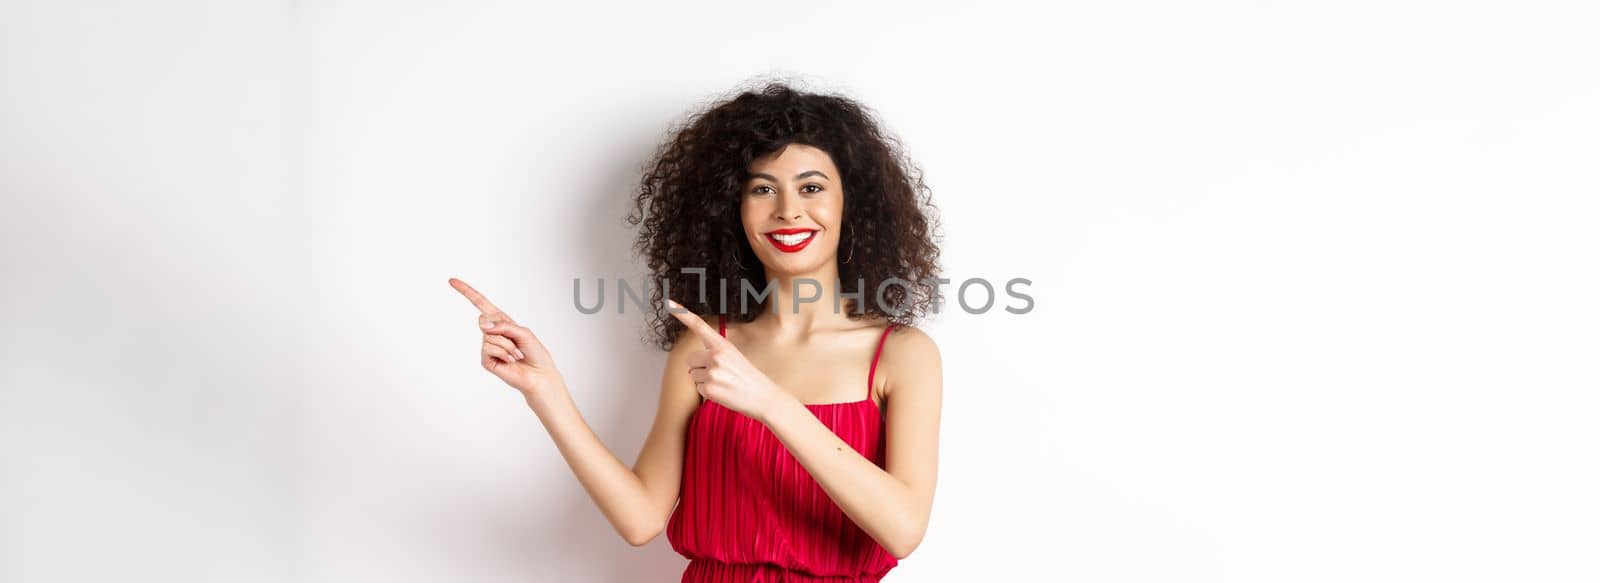 Cheerful female model in fashionable red dress, smiling and pointing fingers right at logo, standing over white background.